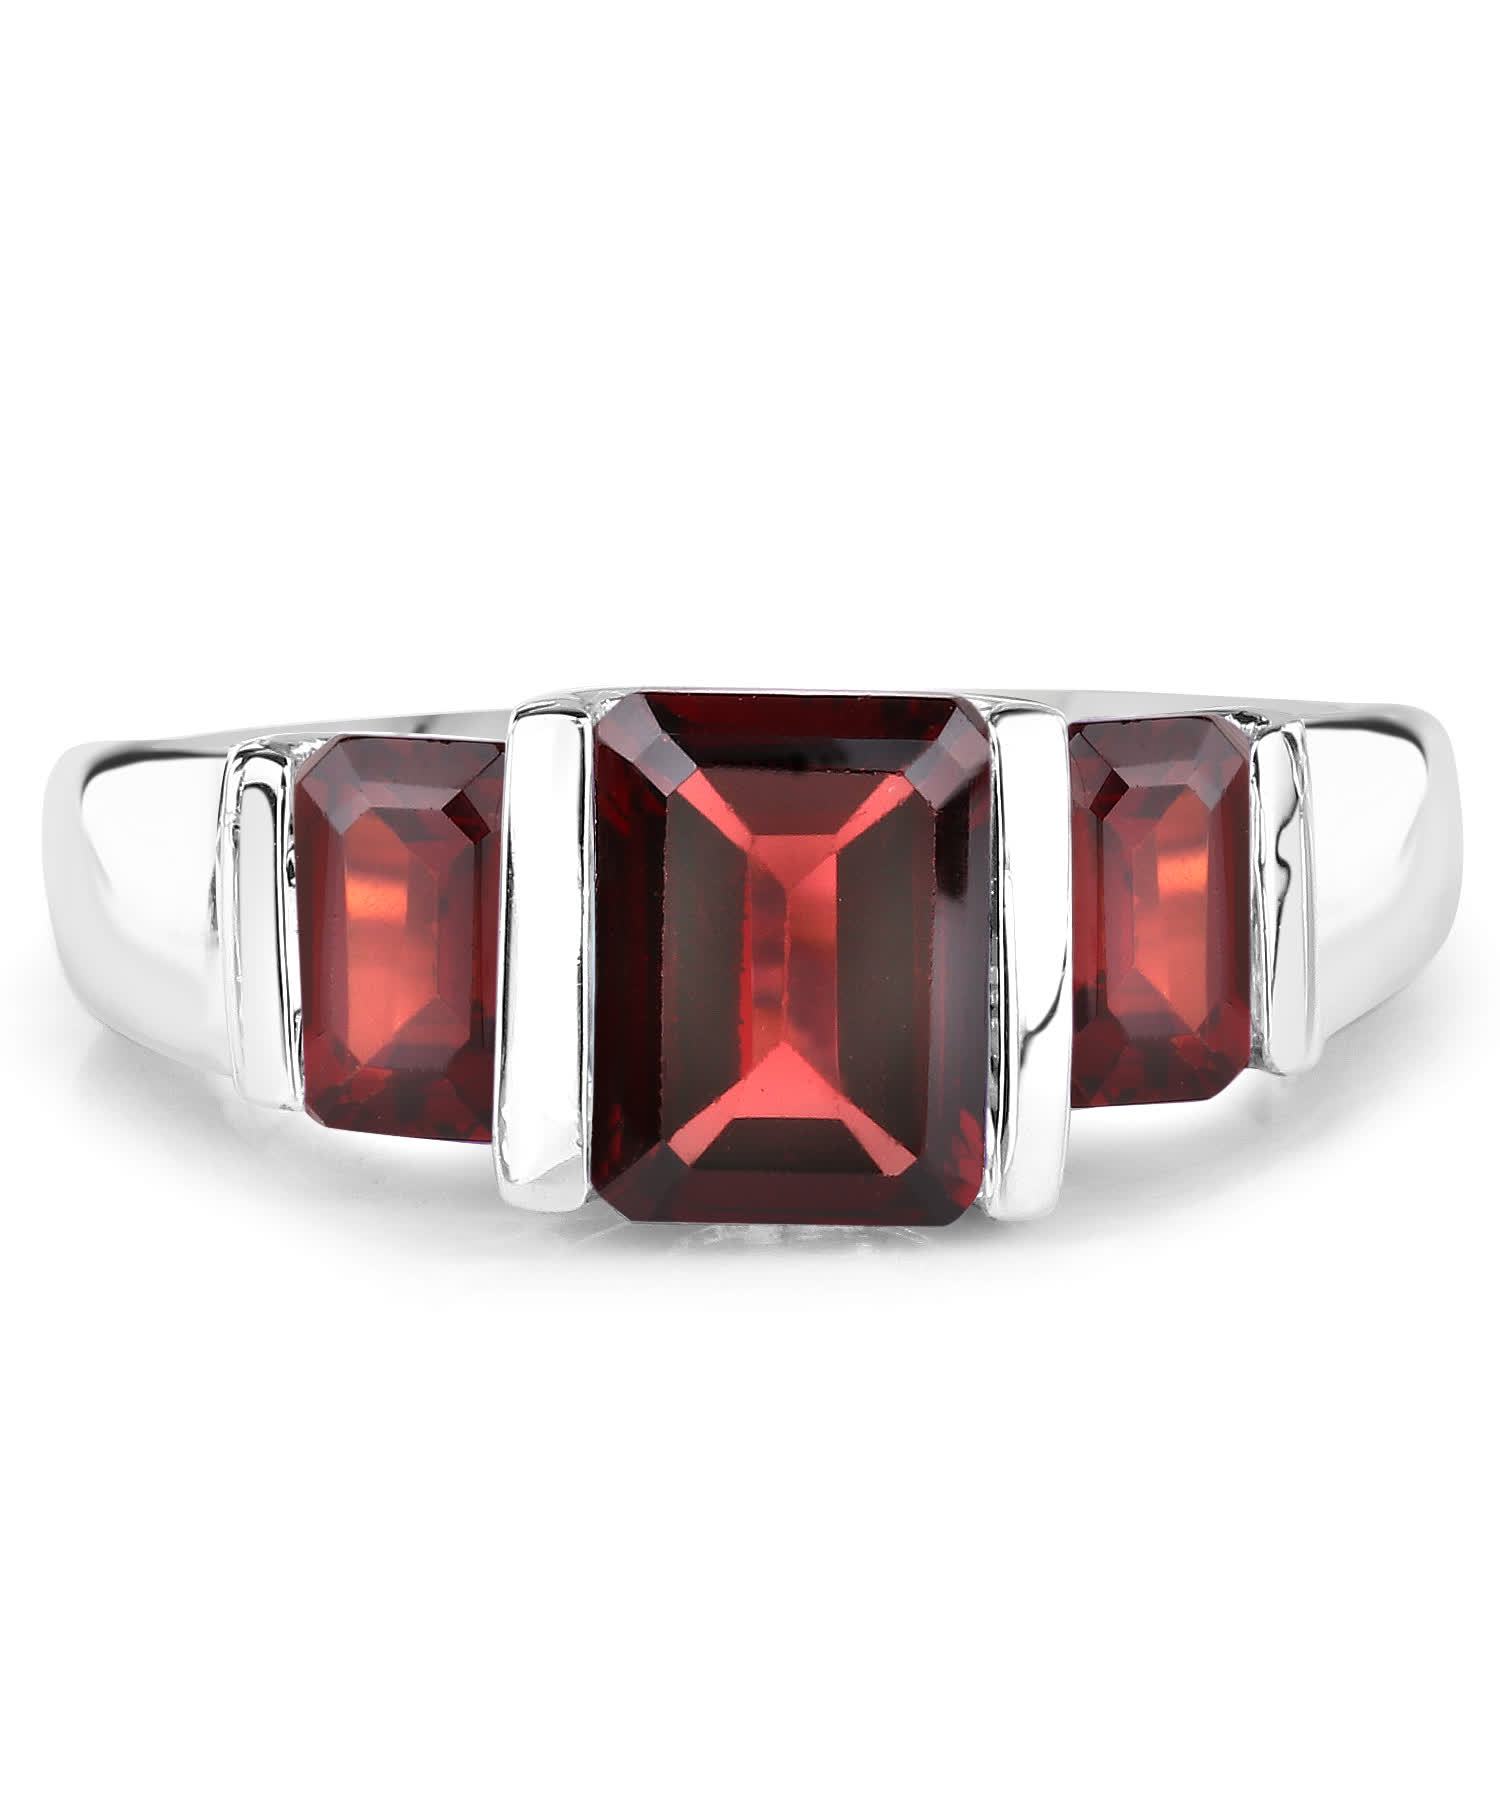 3.45ctw Natural Garnet Rhodium Plated 925 Sterling Silver Three-Stone Right Hand Ring View 3